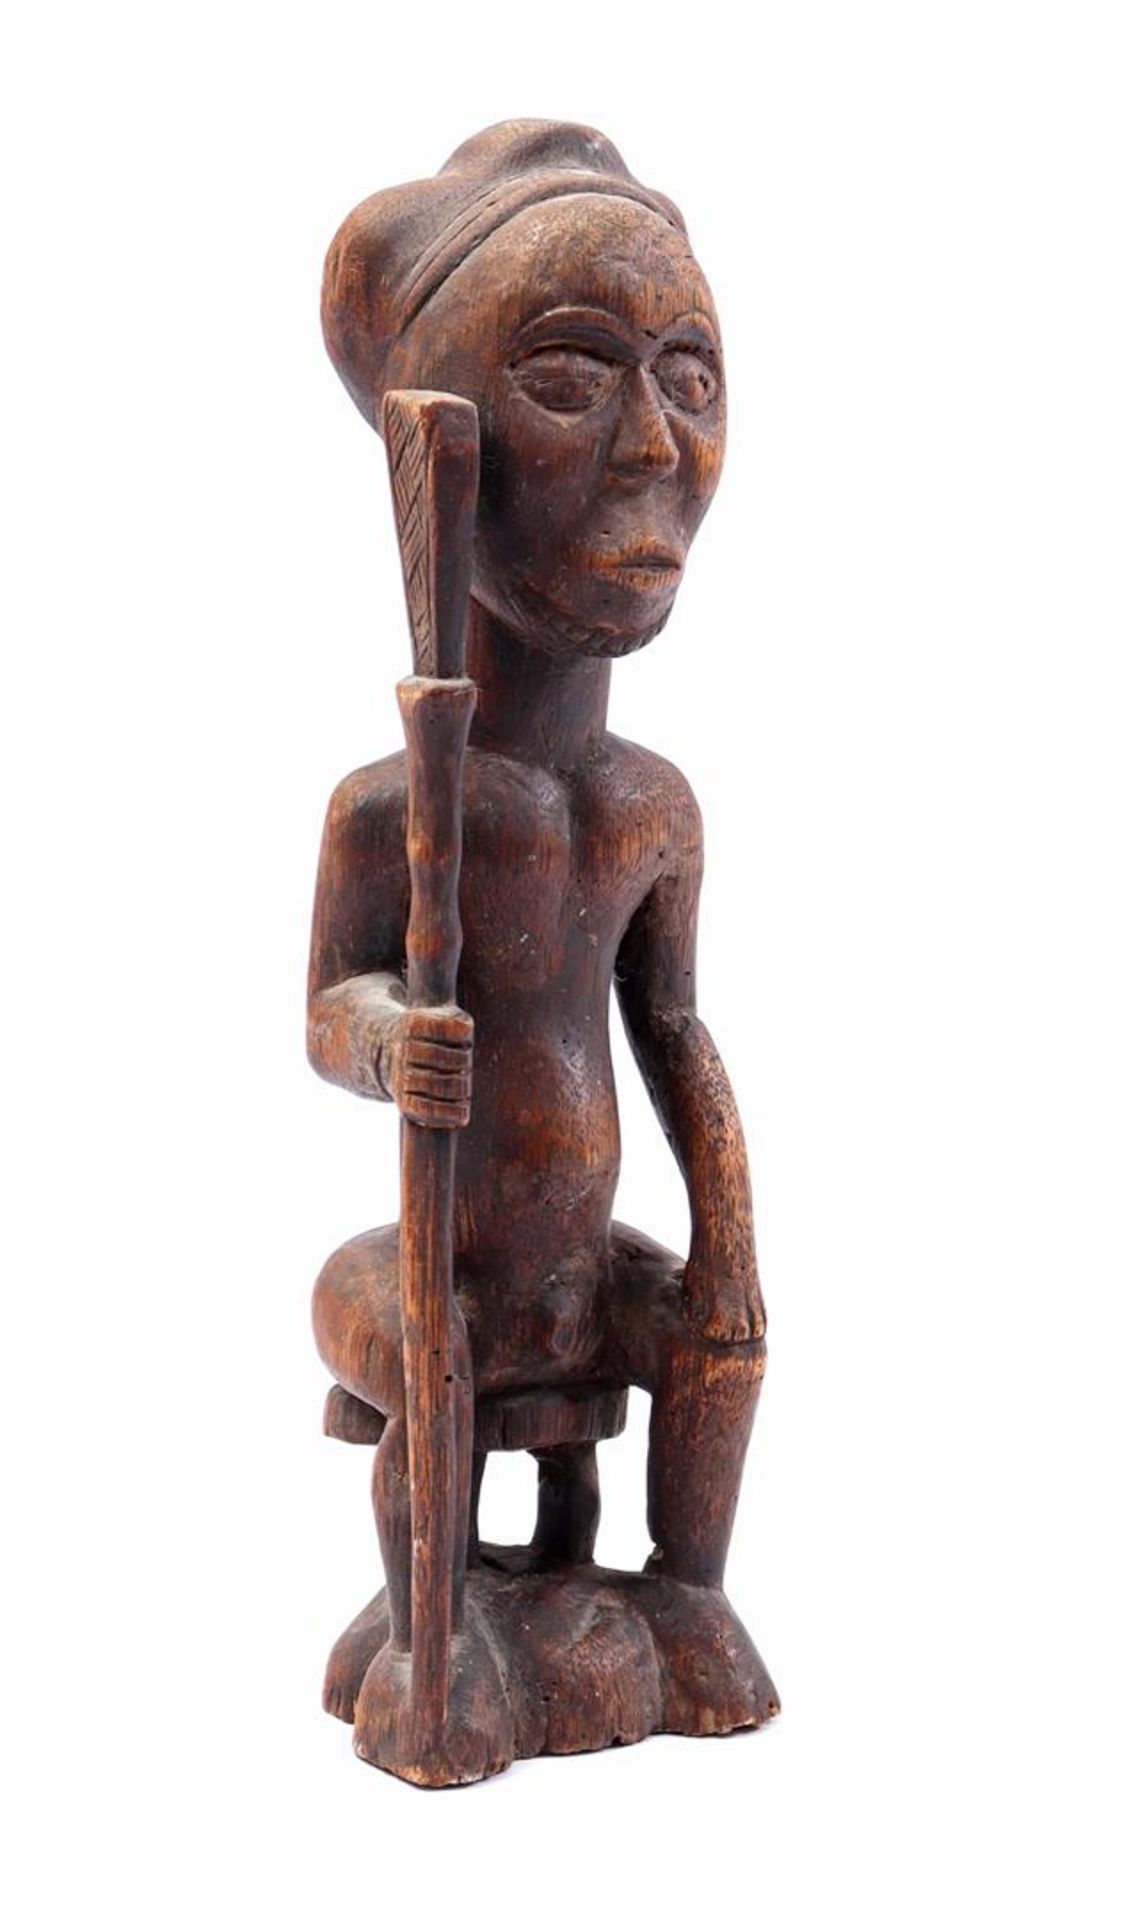 Ceremonial wooden figurine of a person